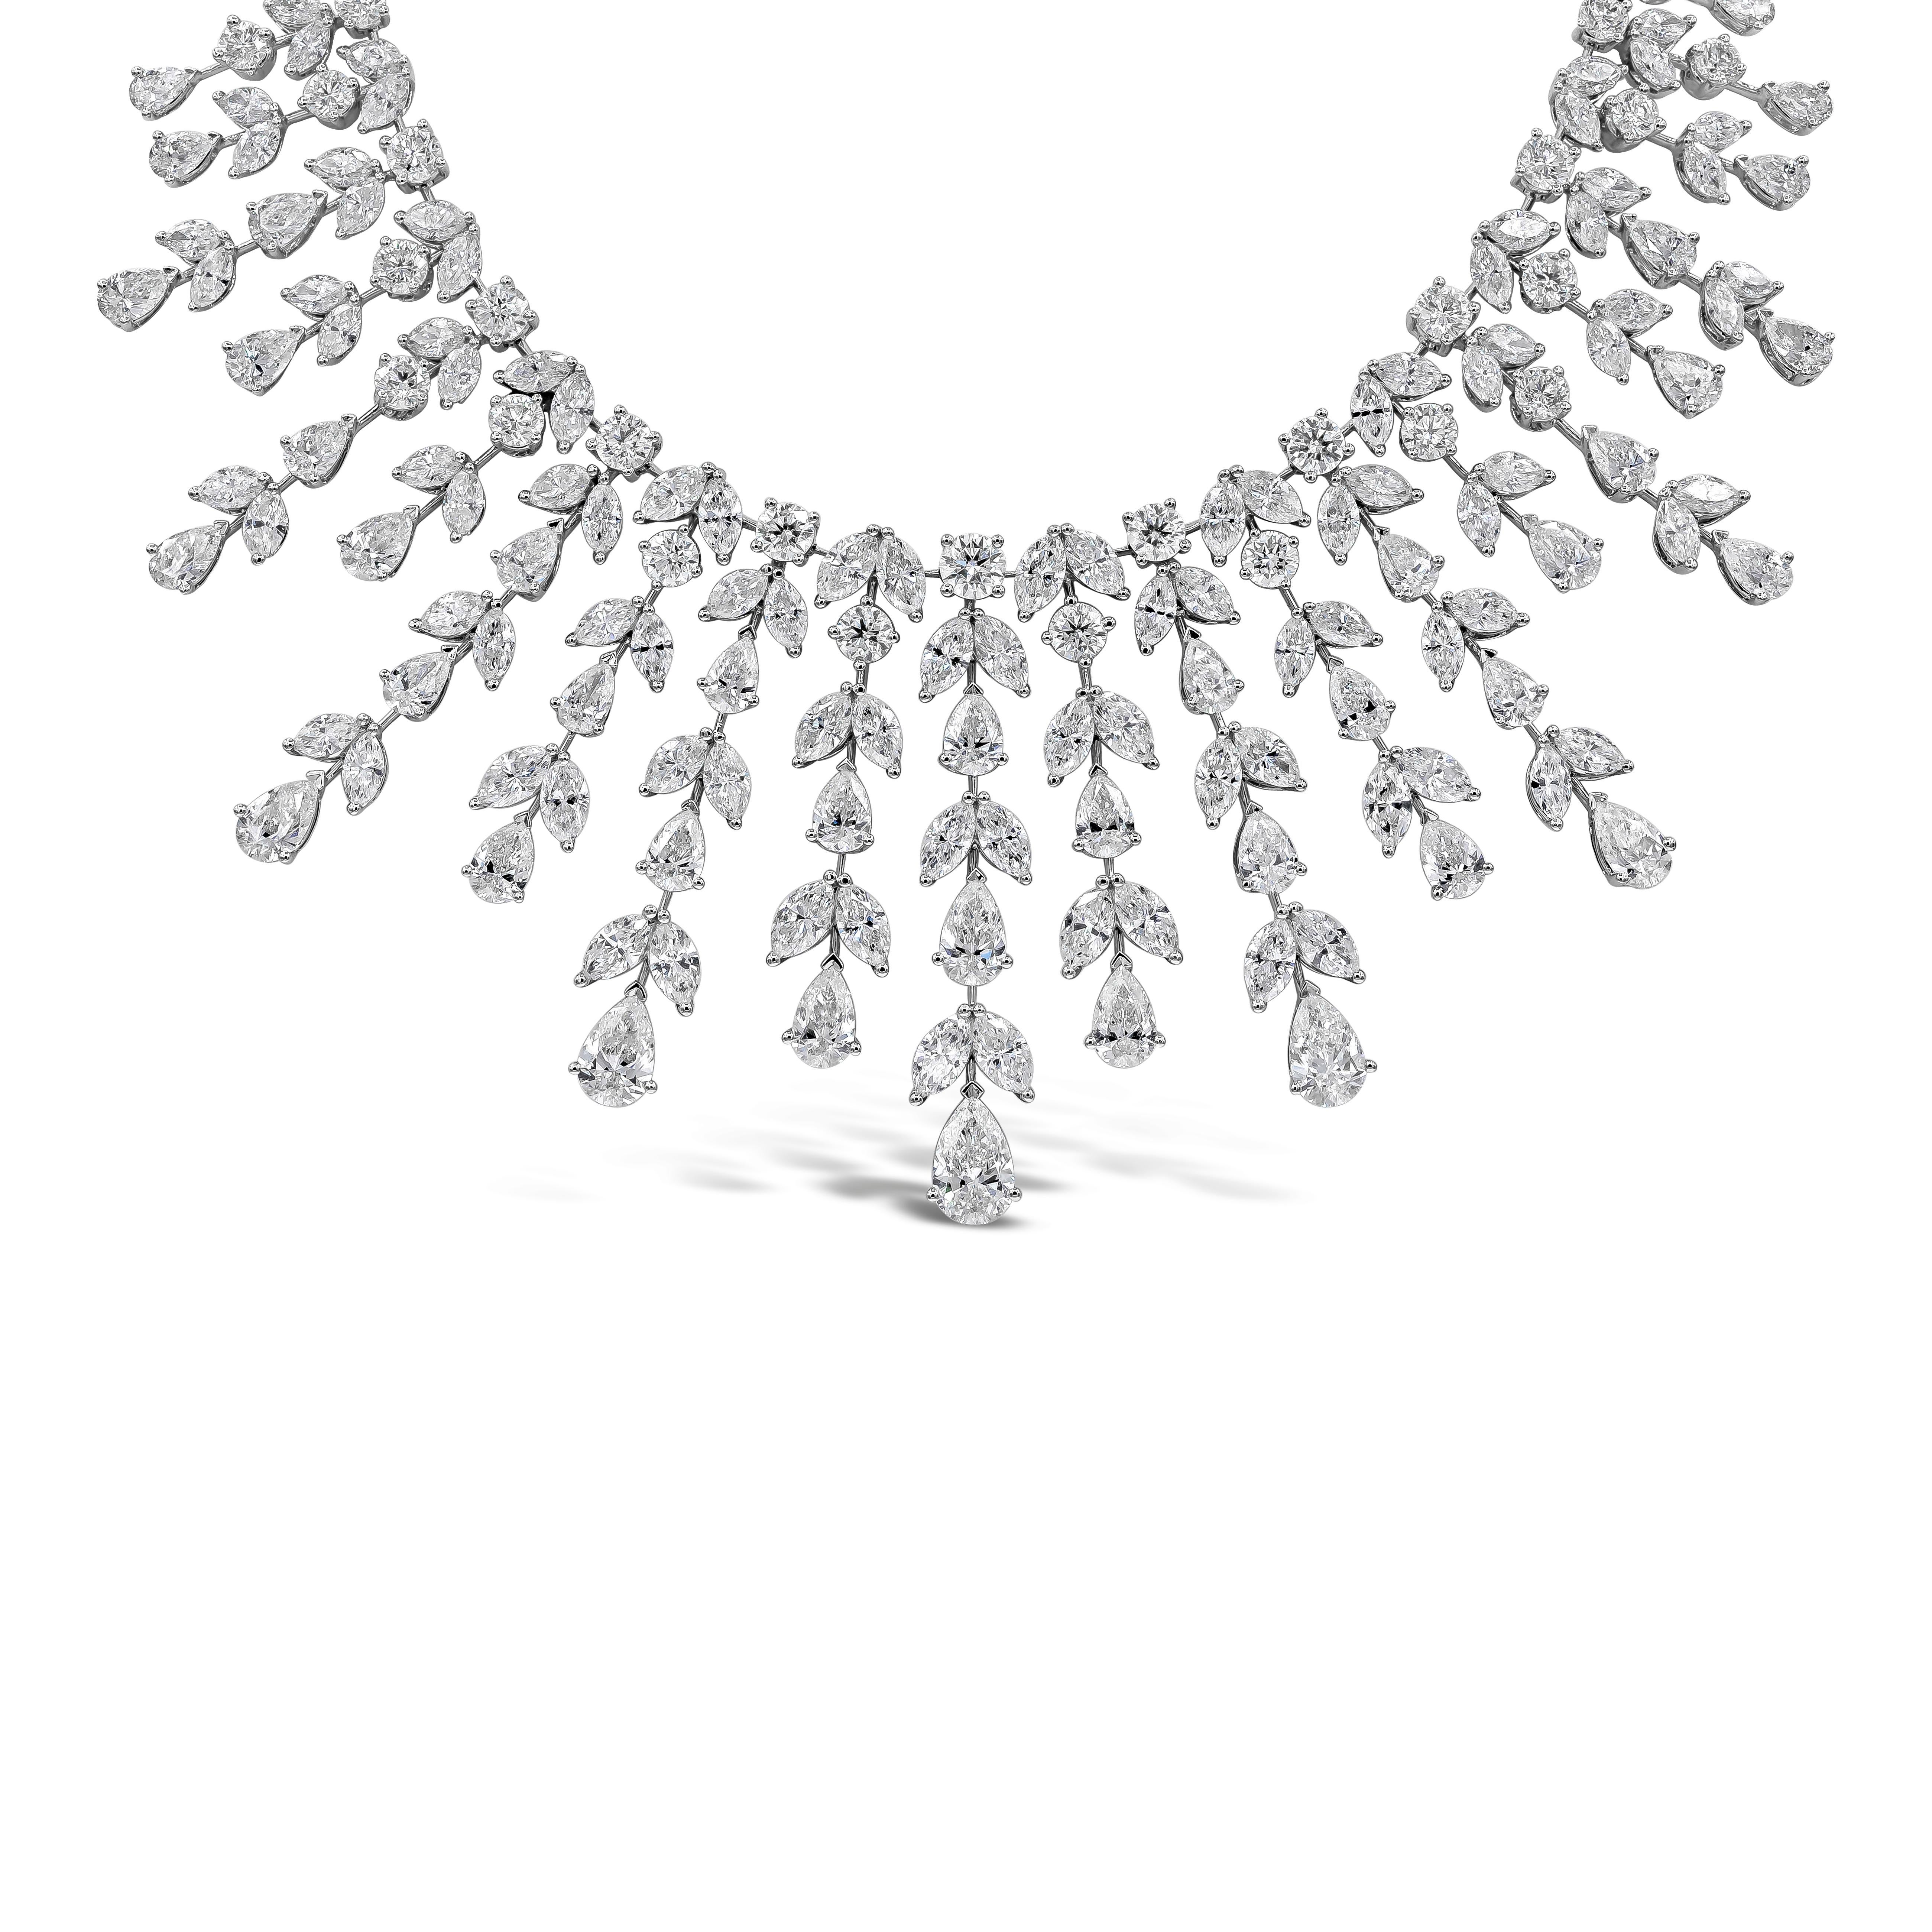 Elegant and well crafted high end jewelry necklace showcasing 307 mixed cut diamonds weighing 100.19 carat total. Exquisitely set in an intricate and fringe design, elegantly crafted in 18k white gold.
